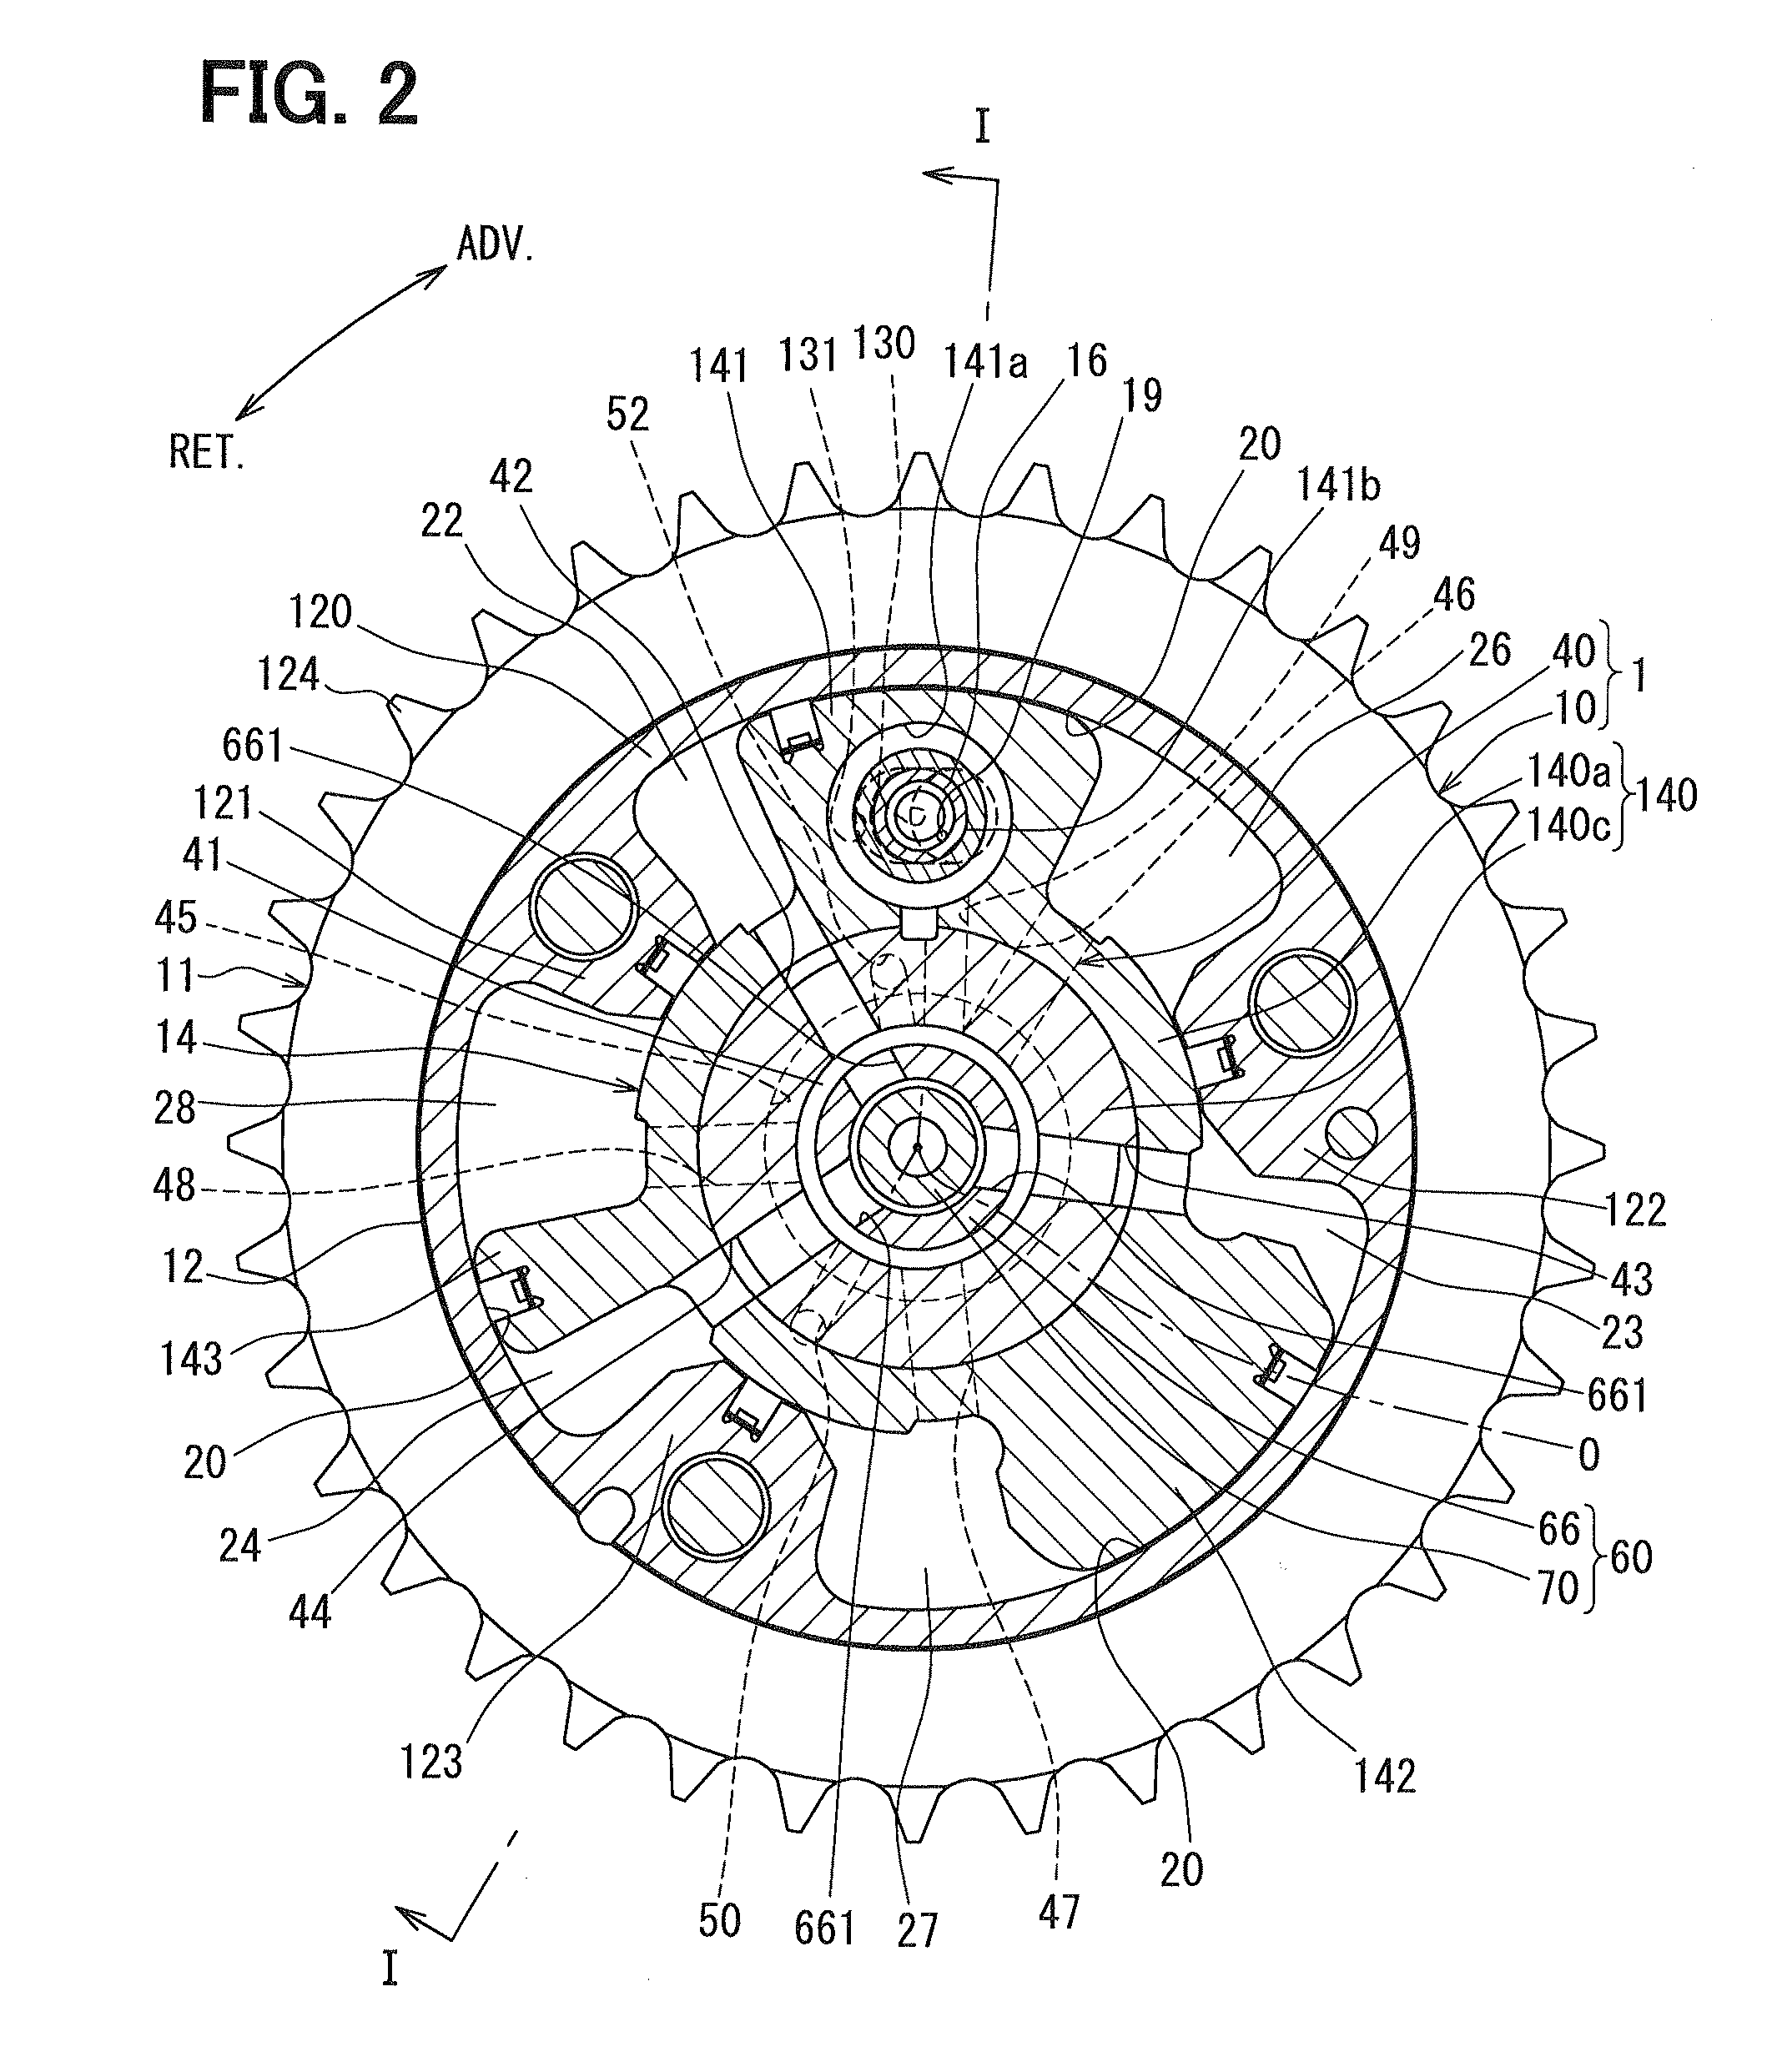 Variable valve timing device